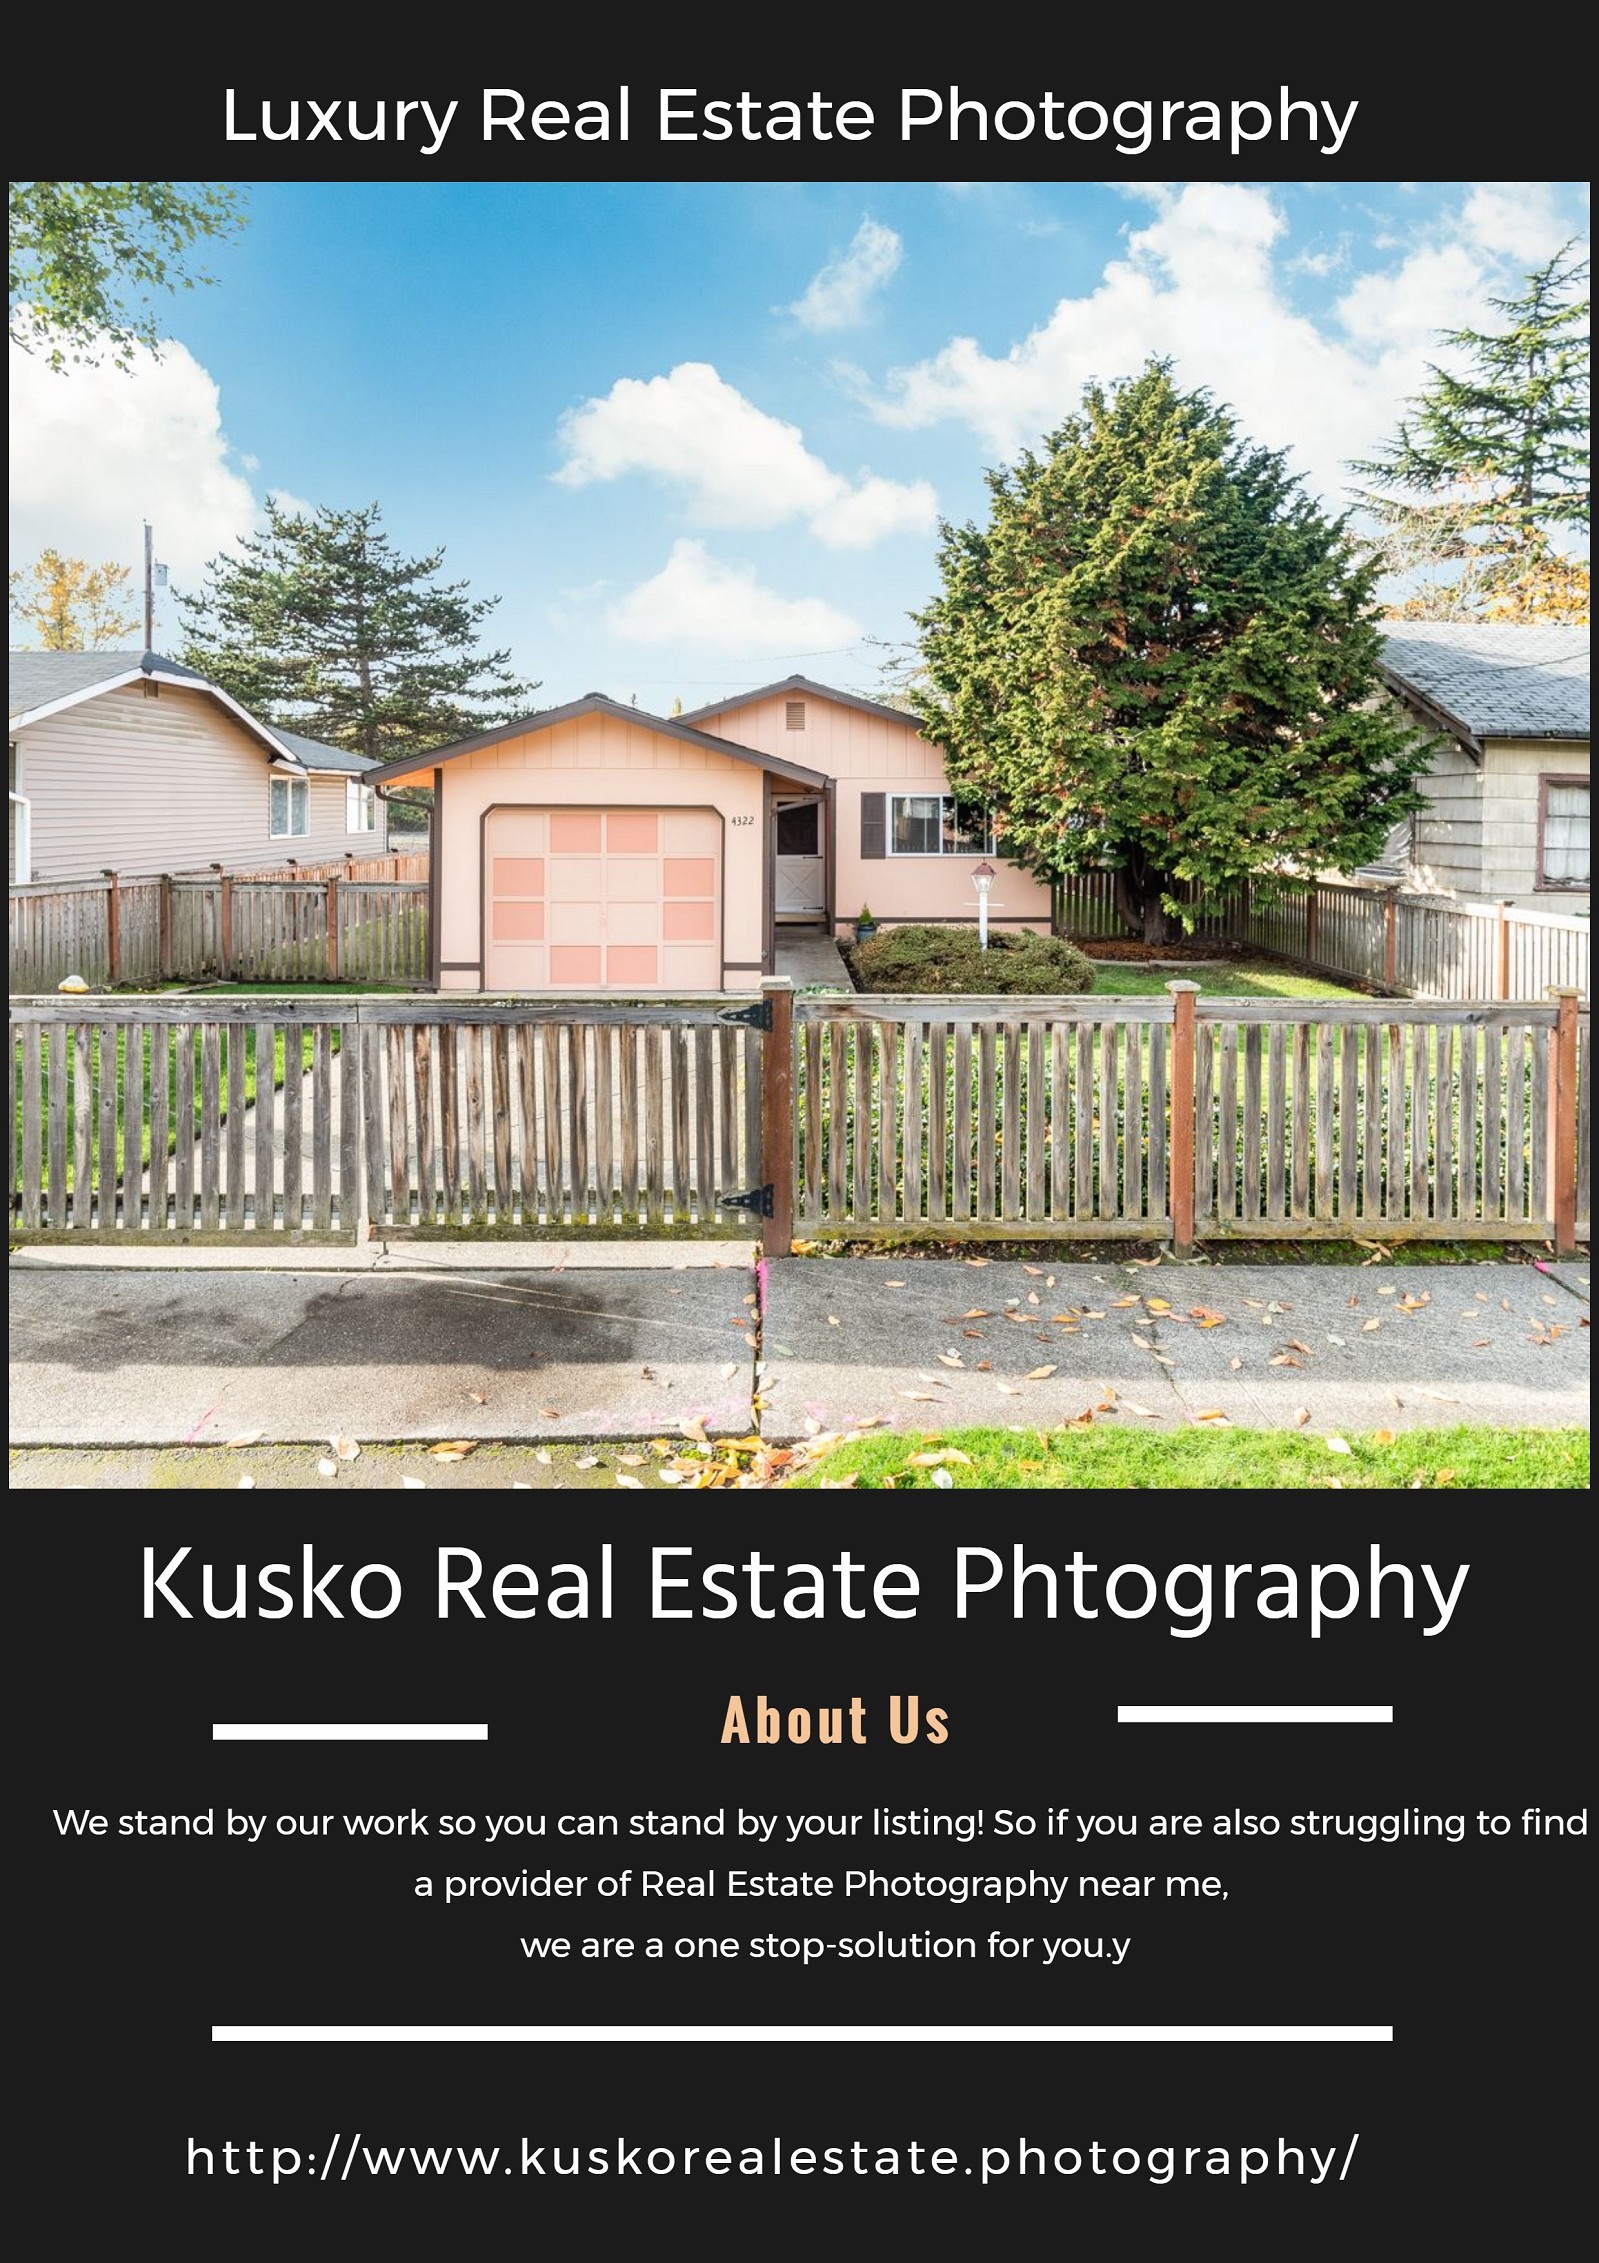 Real Estate Photography Business giving an impetus to real estate value